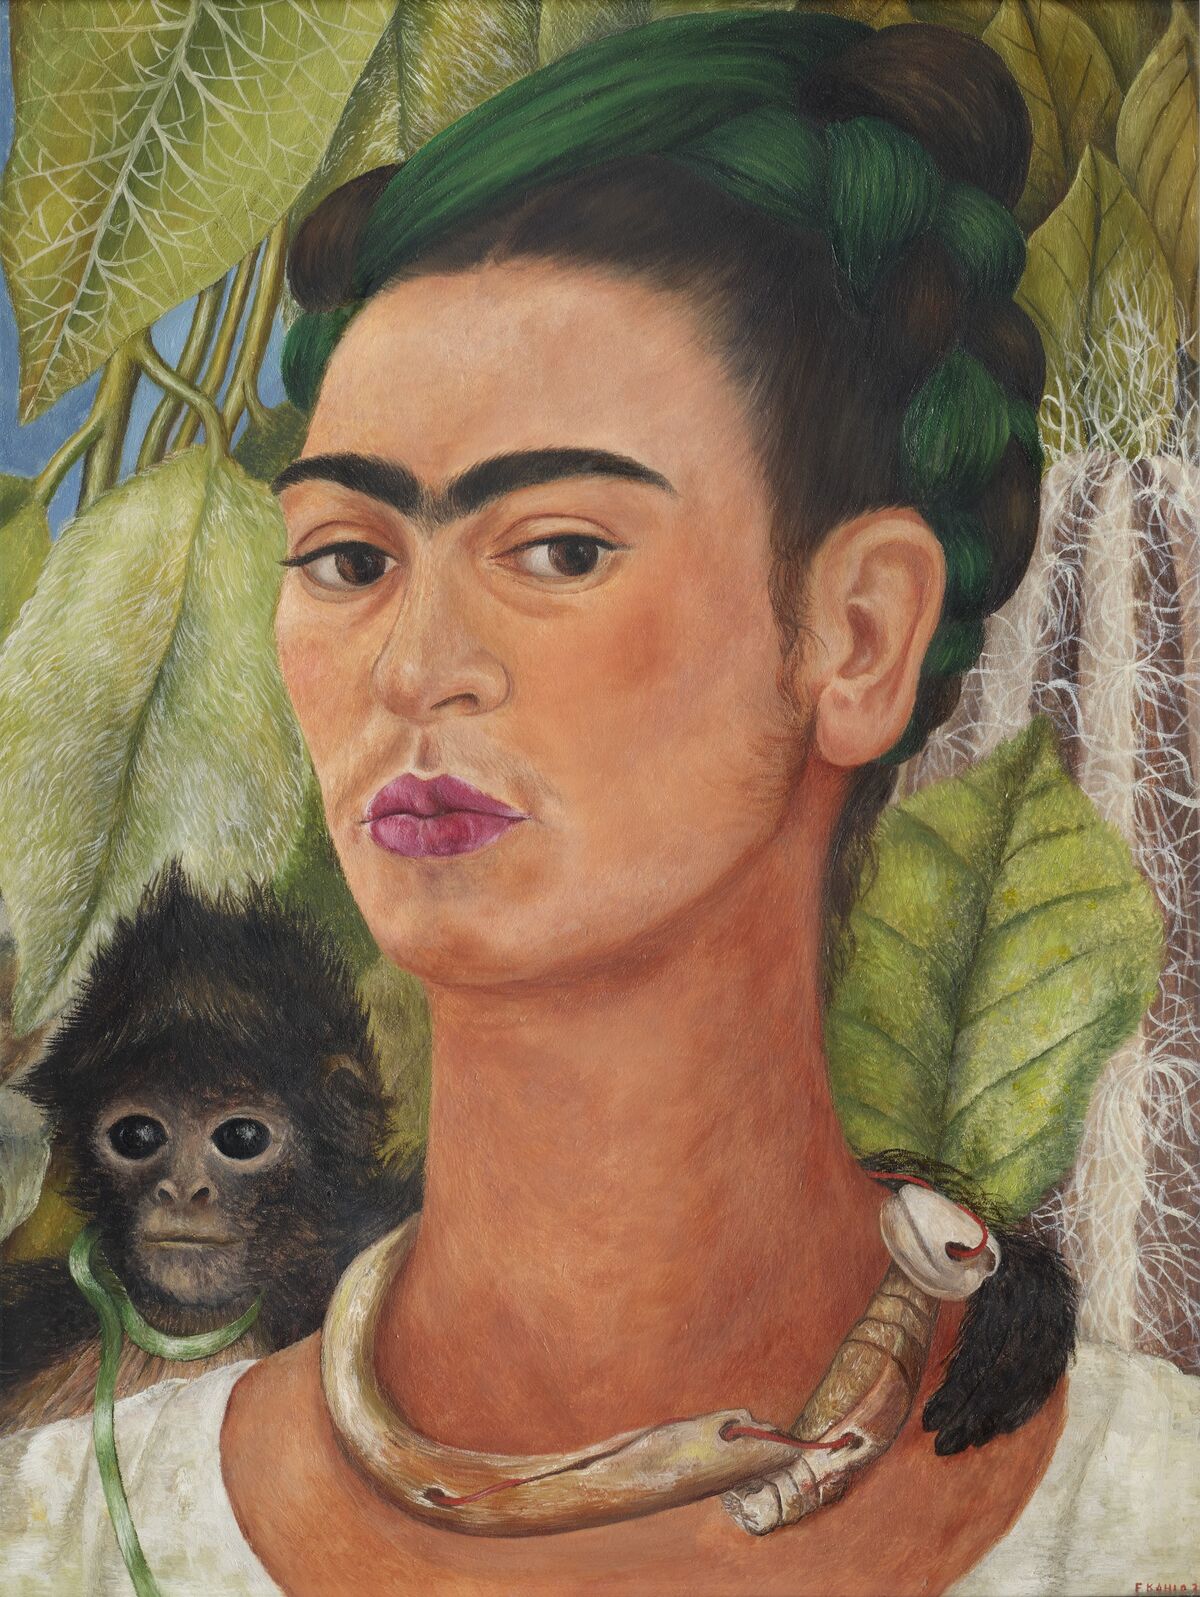 Frida Kahlo, Self-Portrait with Monkey, 1938. © Banco de Mexico Diego Rivera Frida Kahlo Museums Trust, Mexico, D.F. / Artists Rights Society (ARS), New York. Courtesy of Albright-Knox Art Gallery.